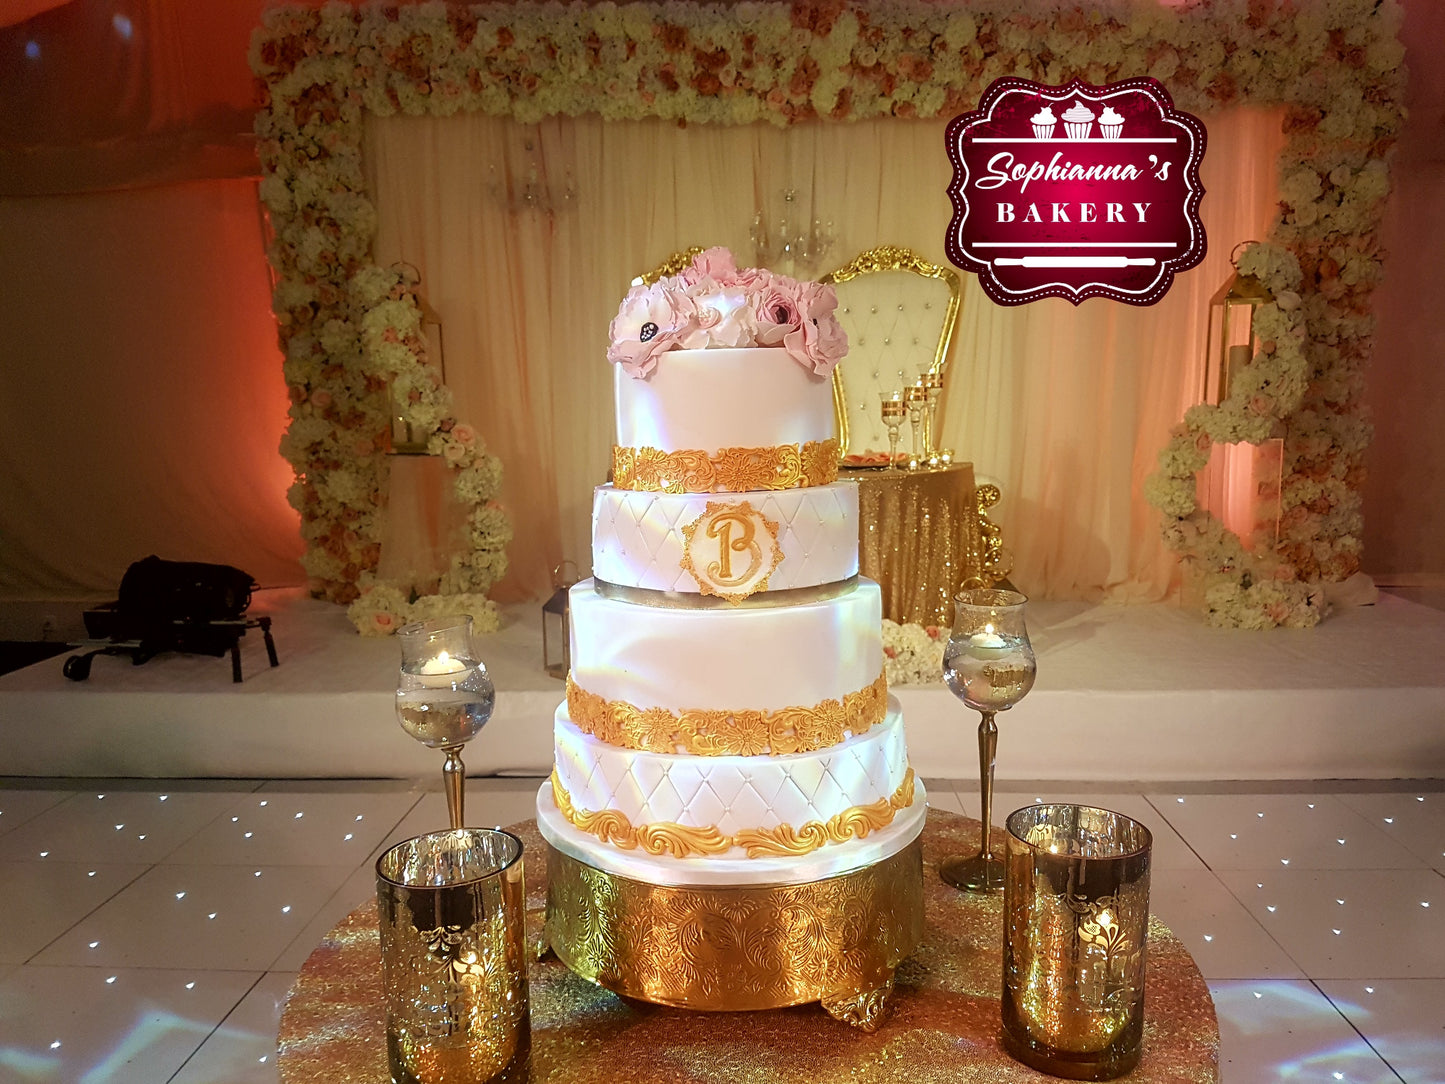 Four-tier gold and white wedding cake